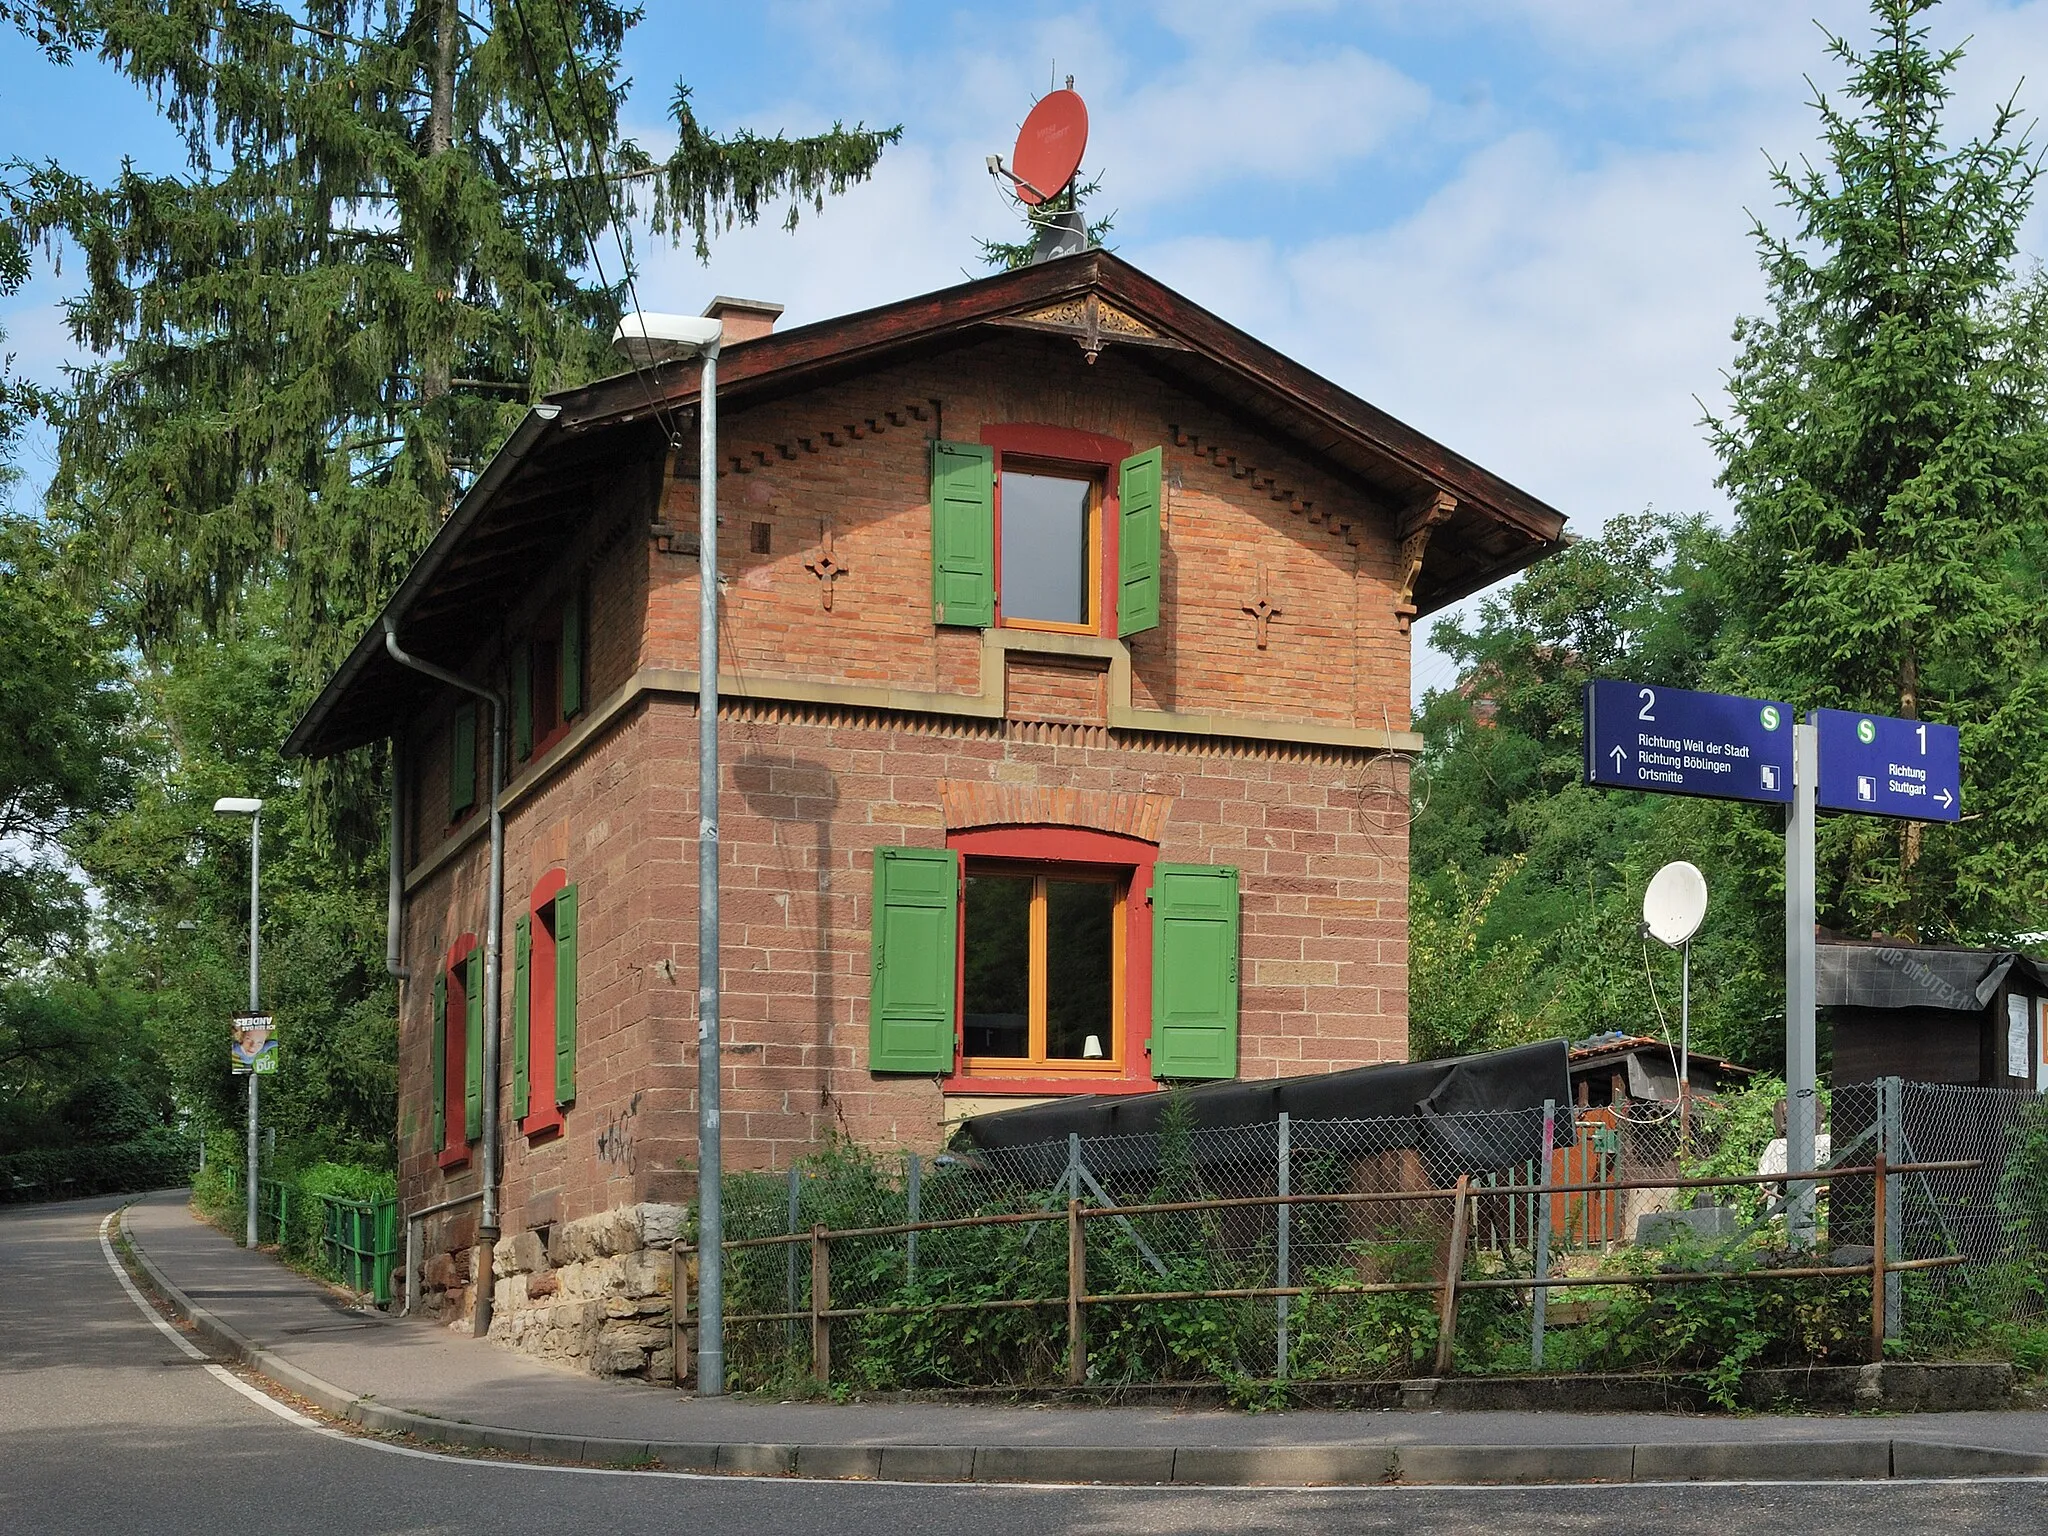 Photo showing: The former railway building in Höfingen in the German Federal State Baden-Württemberg.